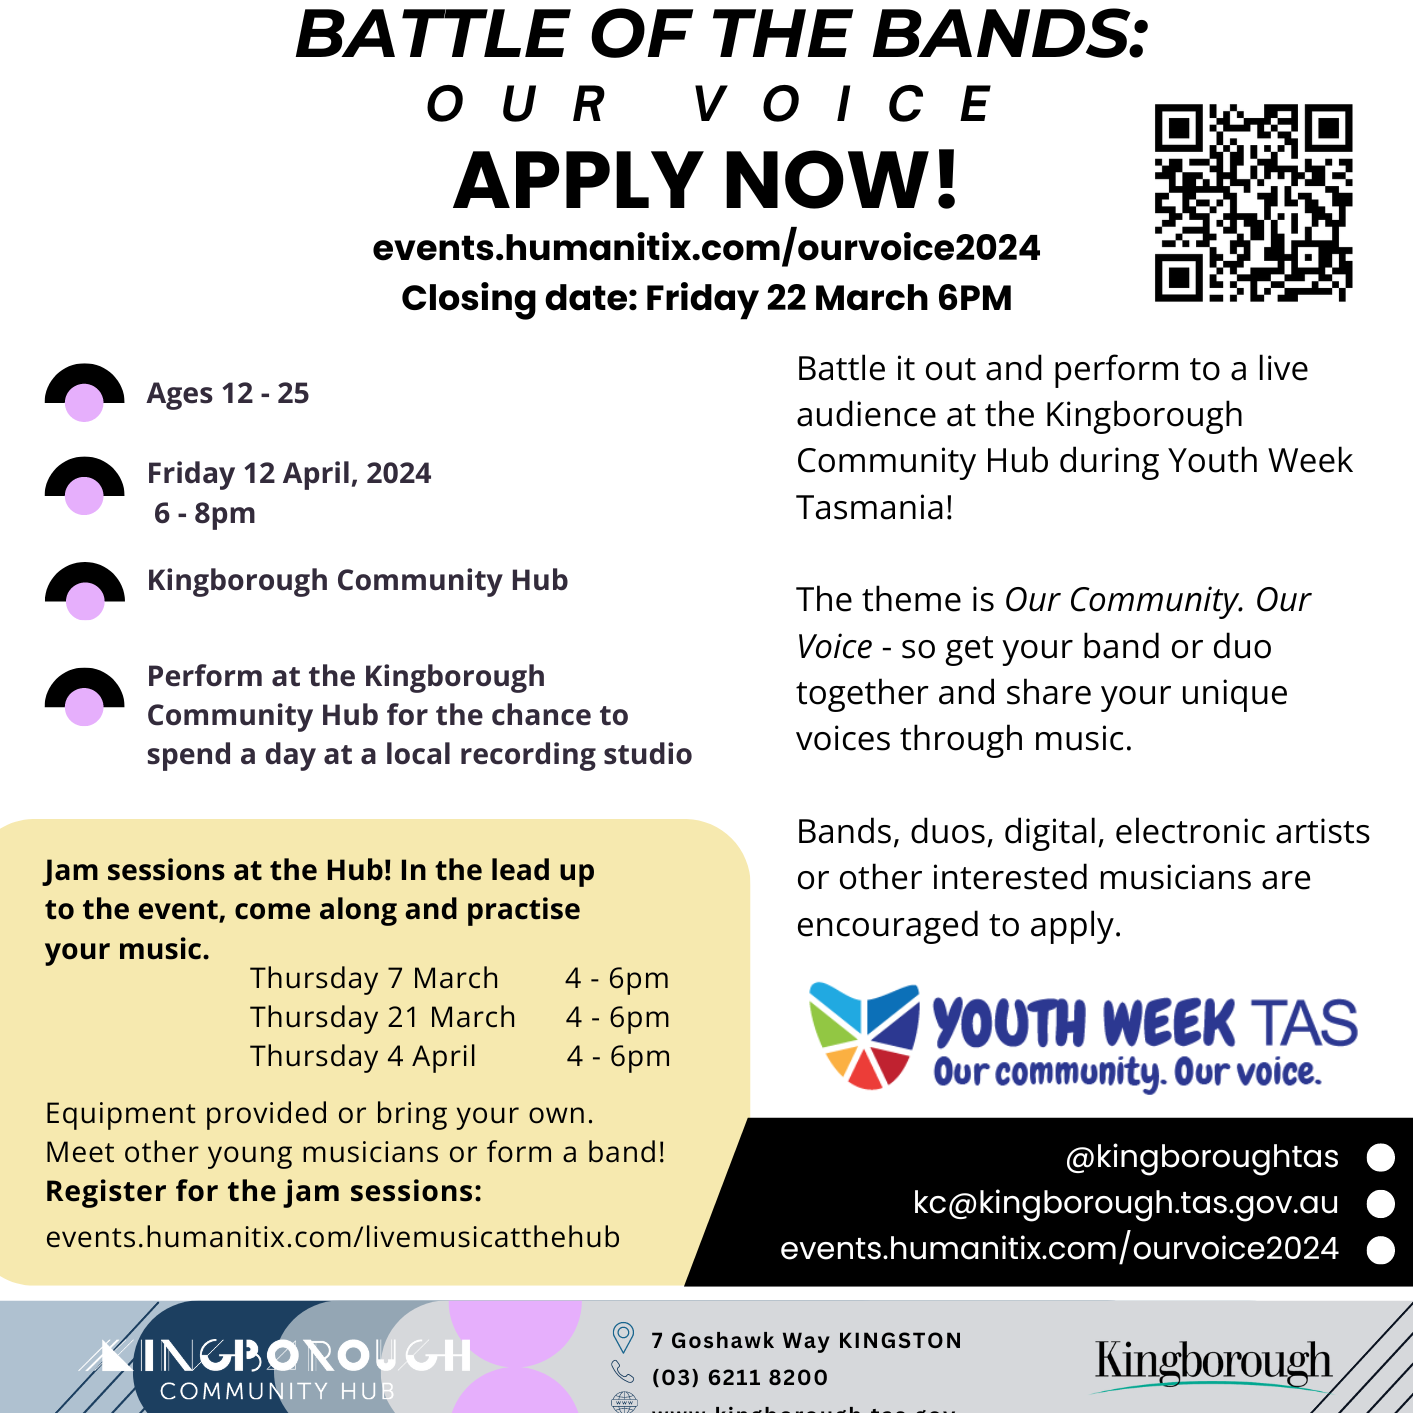 A poster promoting Kingborough Council's "Battle of the Bands" event